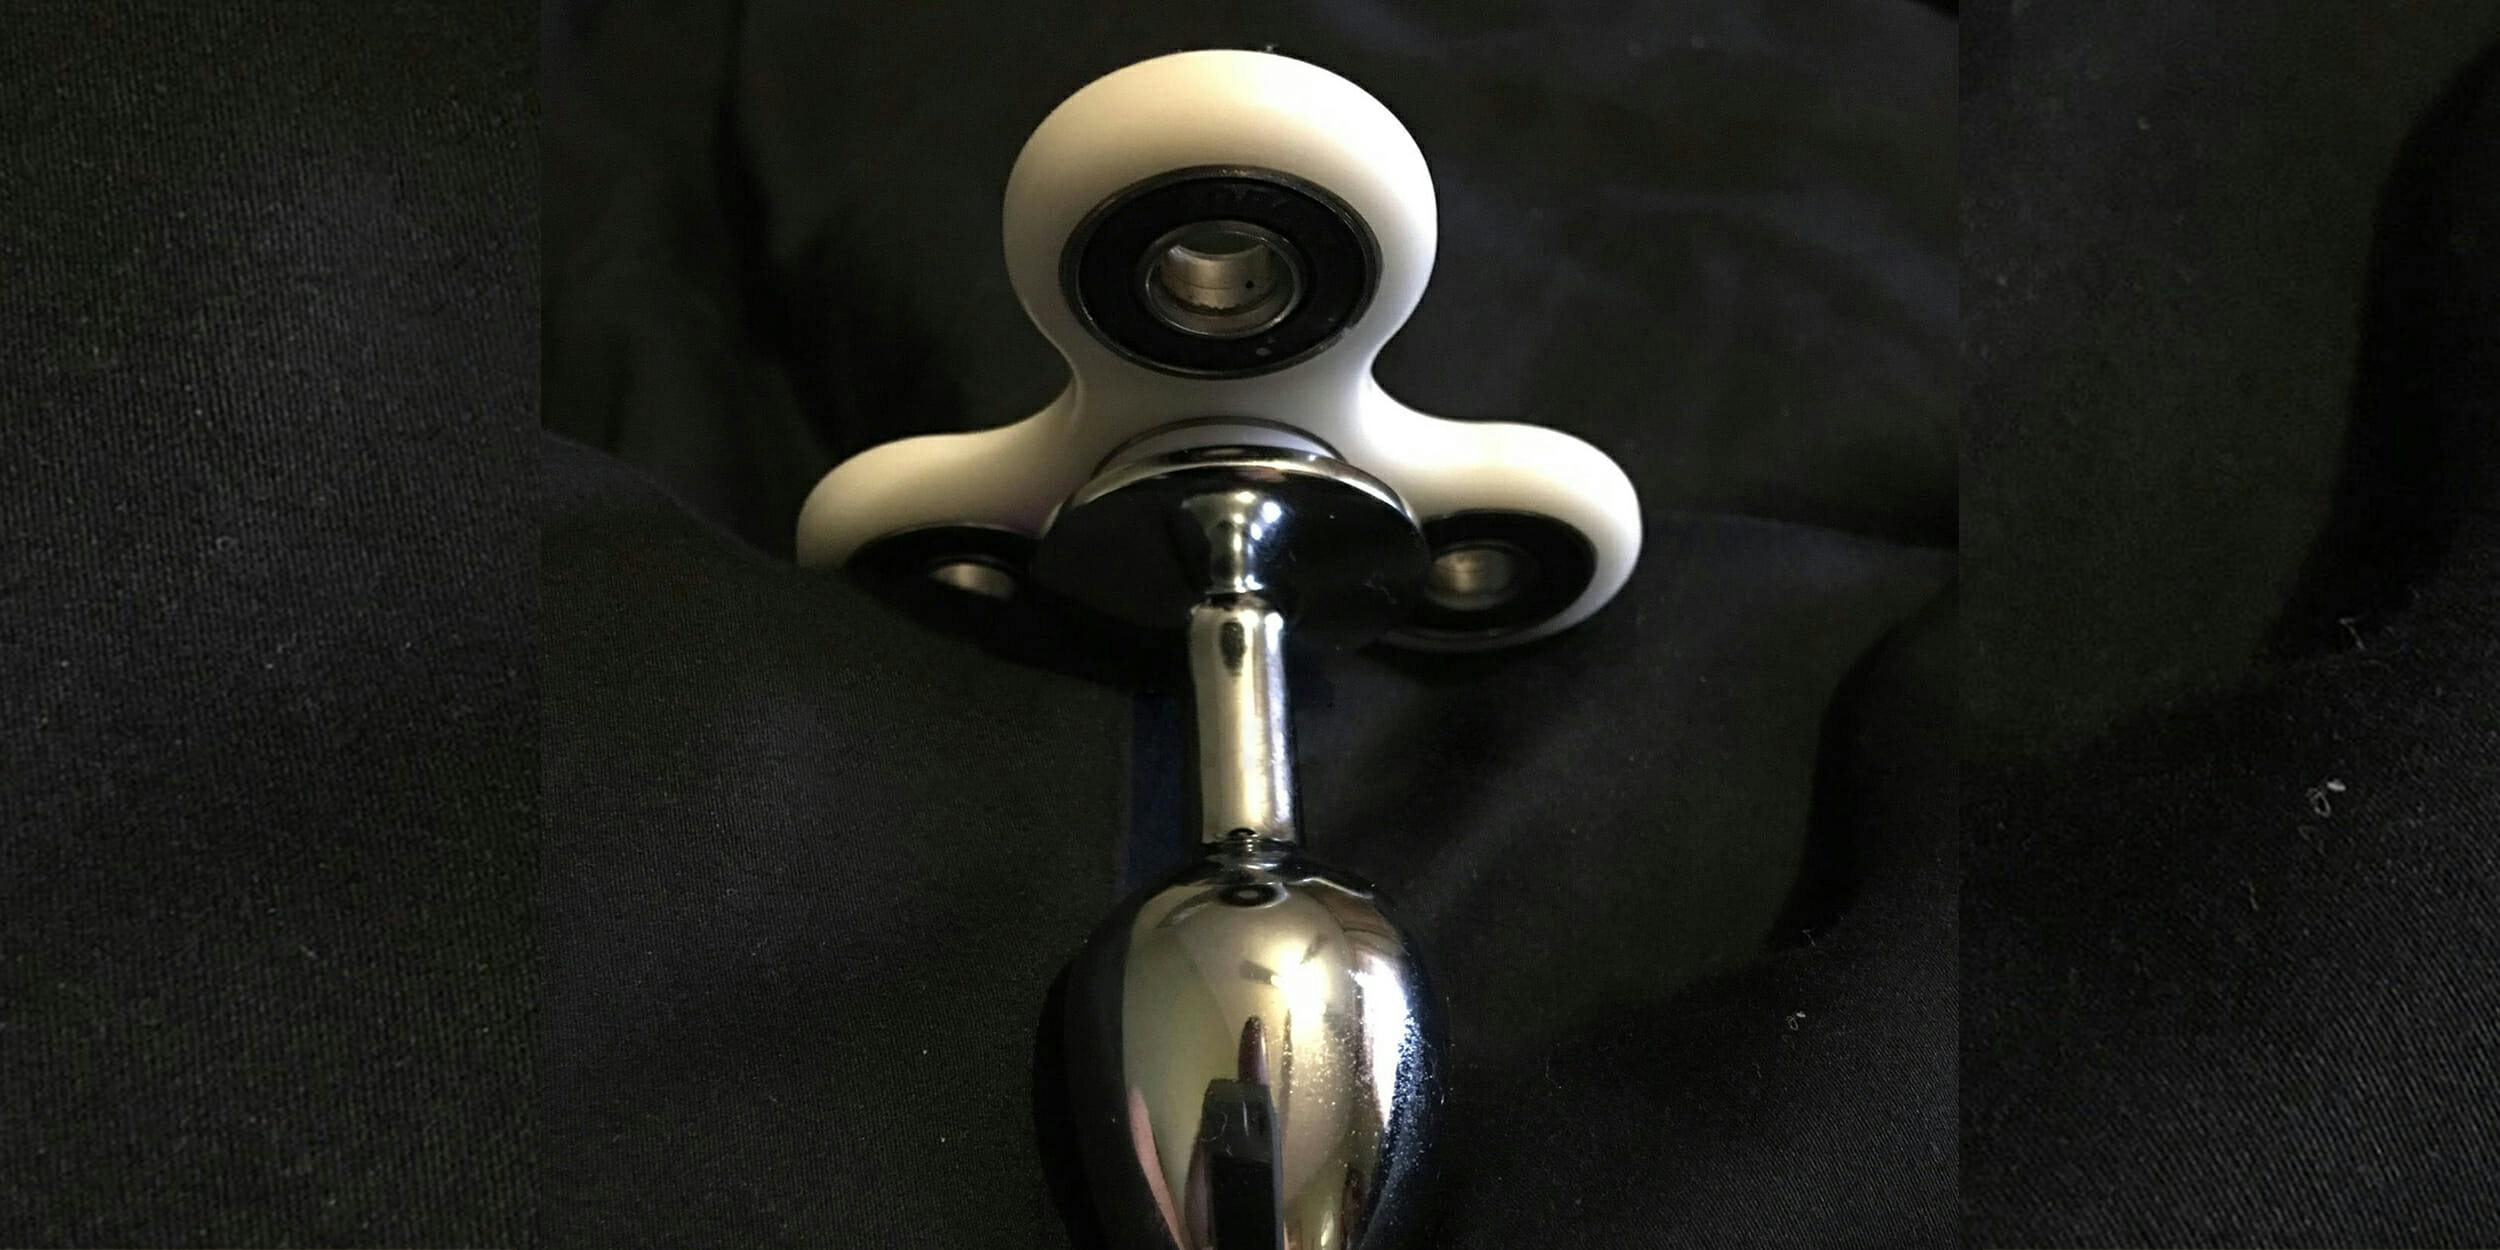 You can now get a butt plug with a fidget spinner attached.